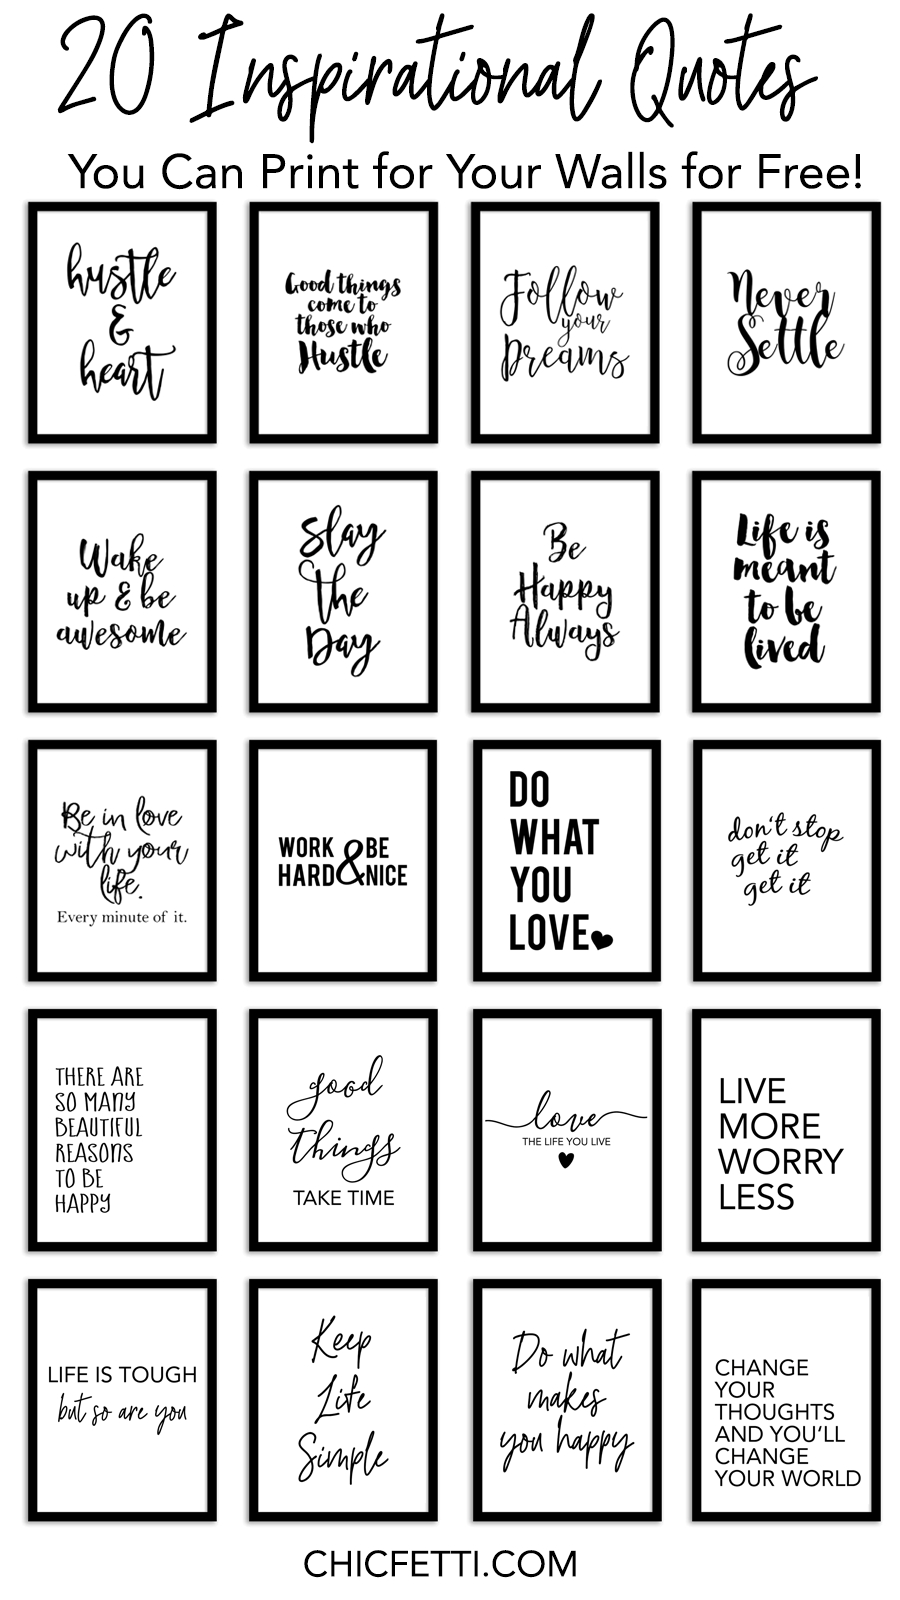 20 Inspirational Quotes You Can Print For Your Walls For Free - Free Printable Inspirational Quotes